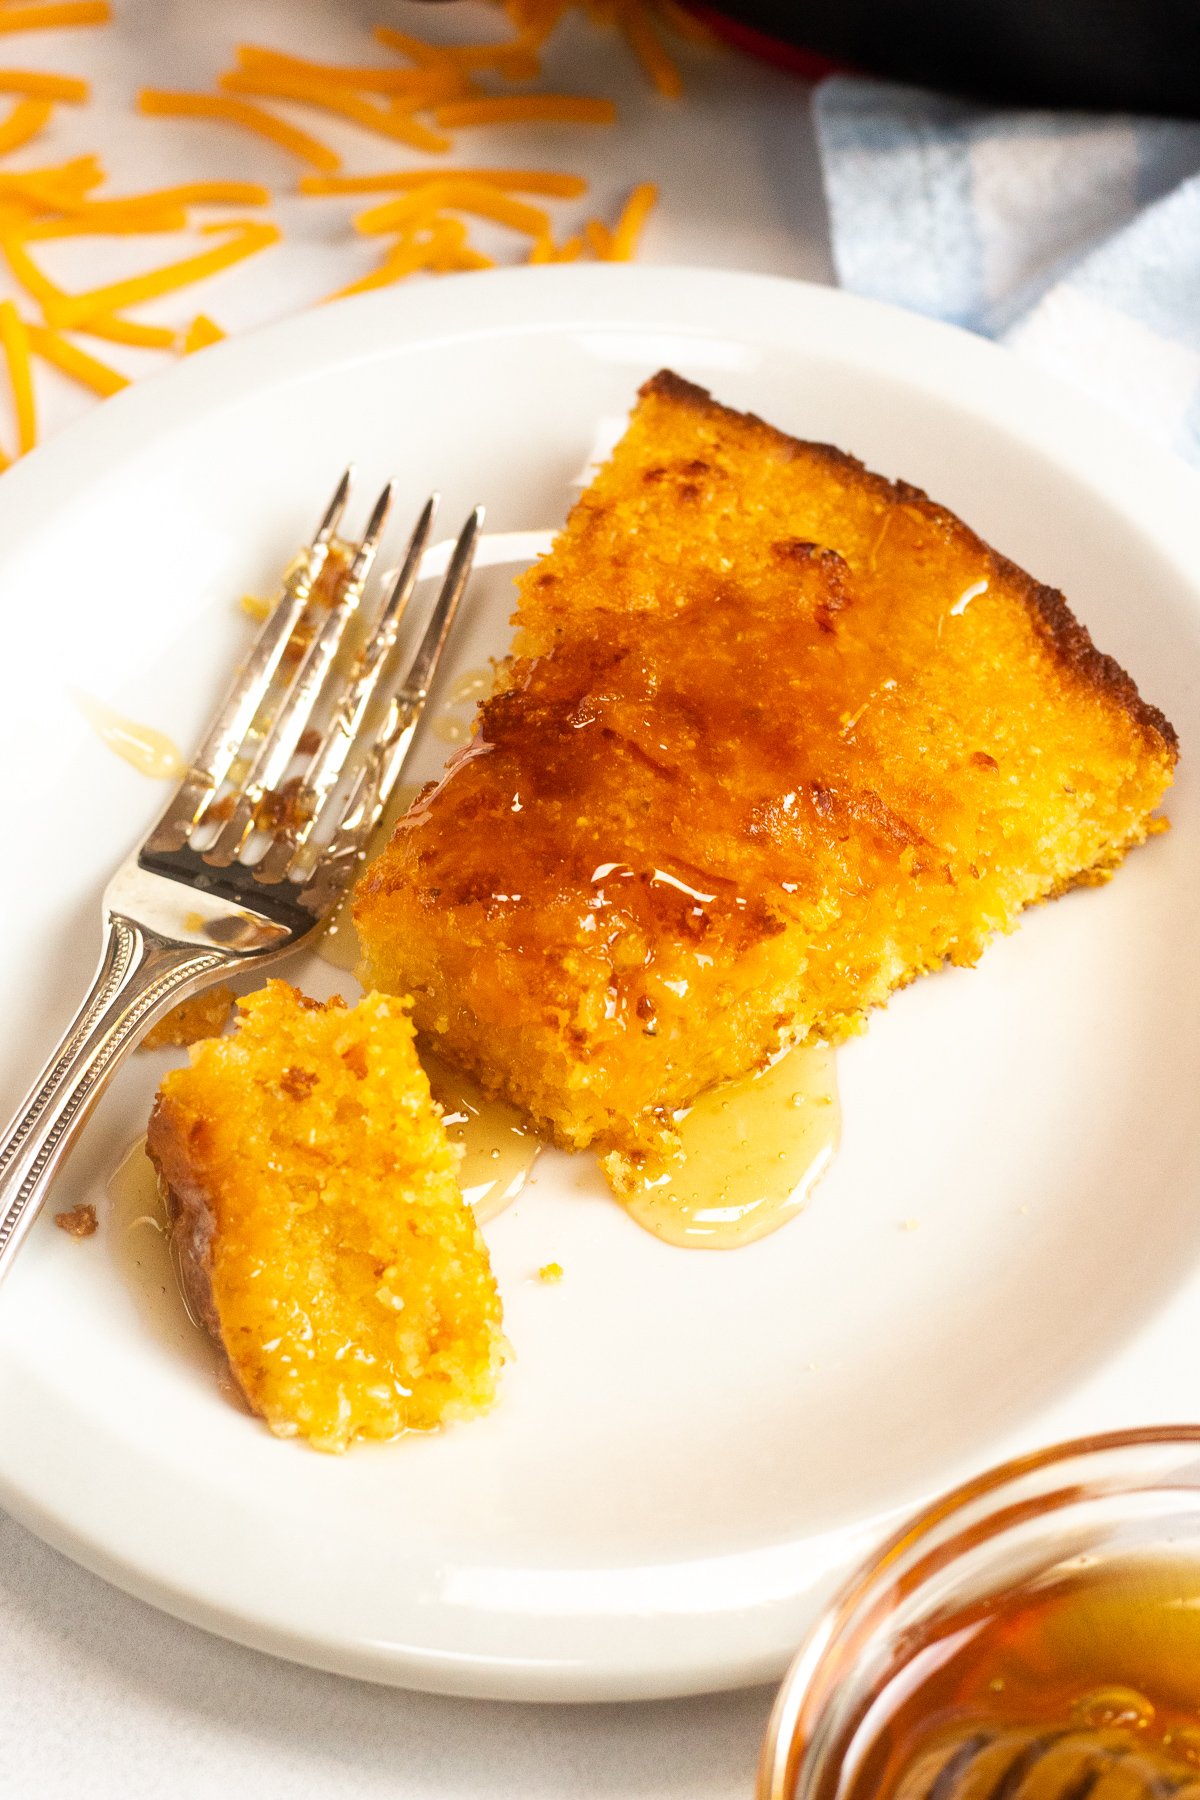 Bite removed from a piece of cornbread that has been drizzled with honey.